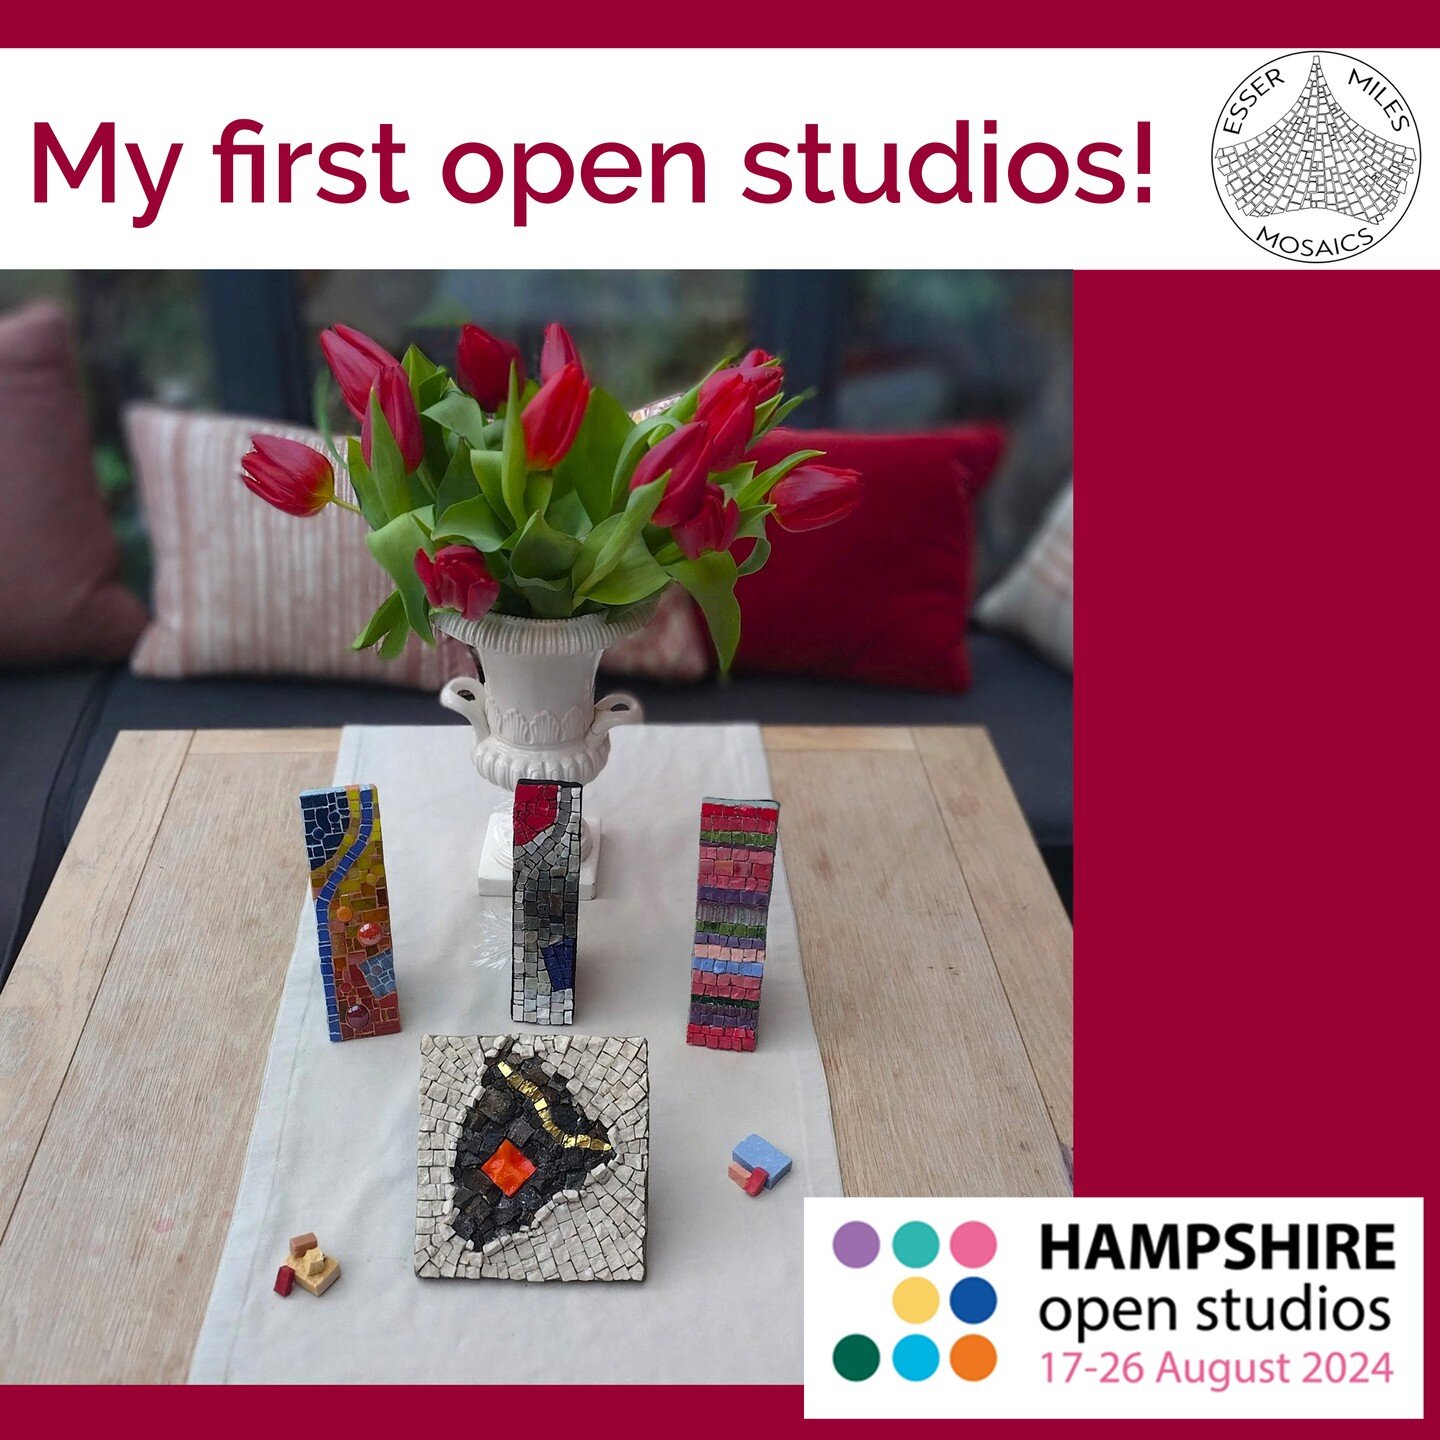 My new studio will be ready for the @hampshireopenstudio. Come and see me during 17-26 August 2024 in Winchester! #hampshireopenstudios #mosaic #mosaicartist #winchester #mosaicstudio #hampshire